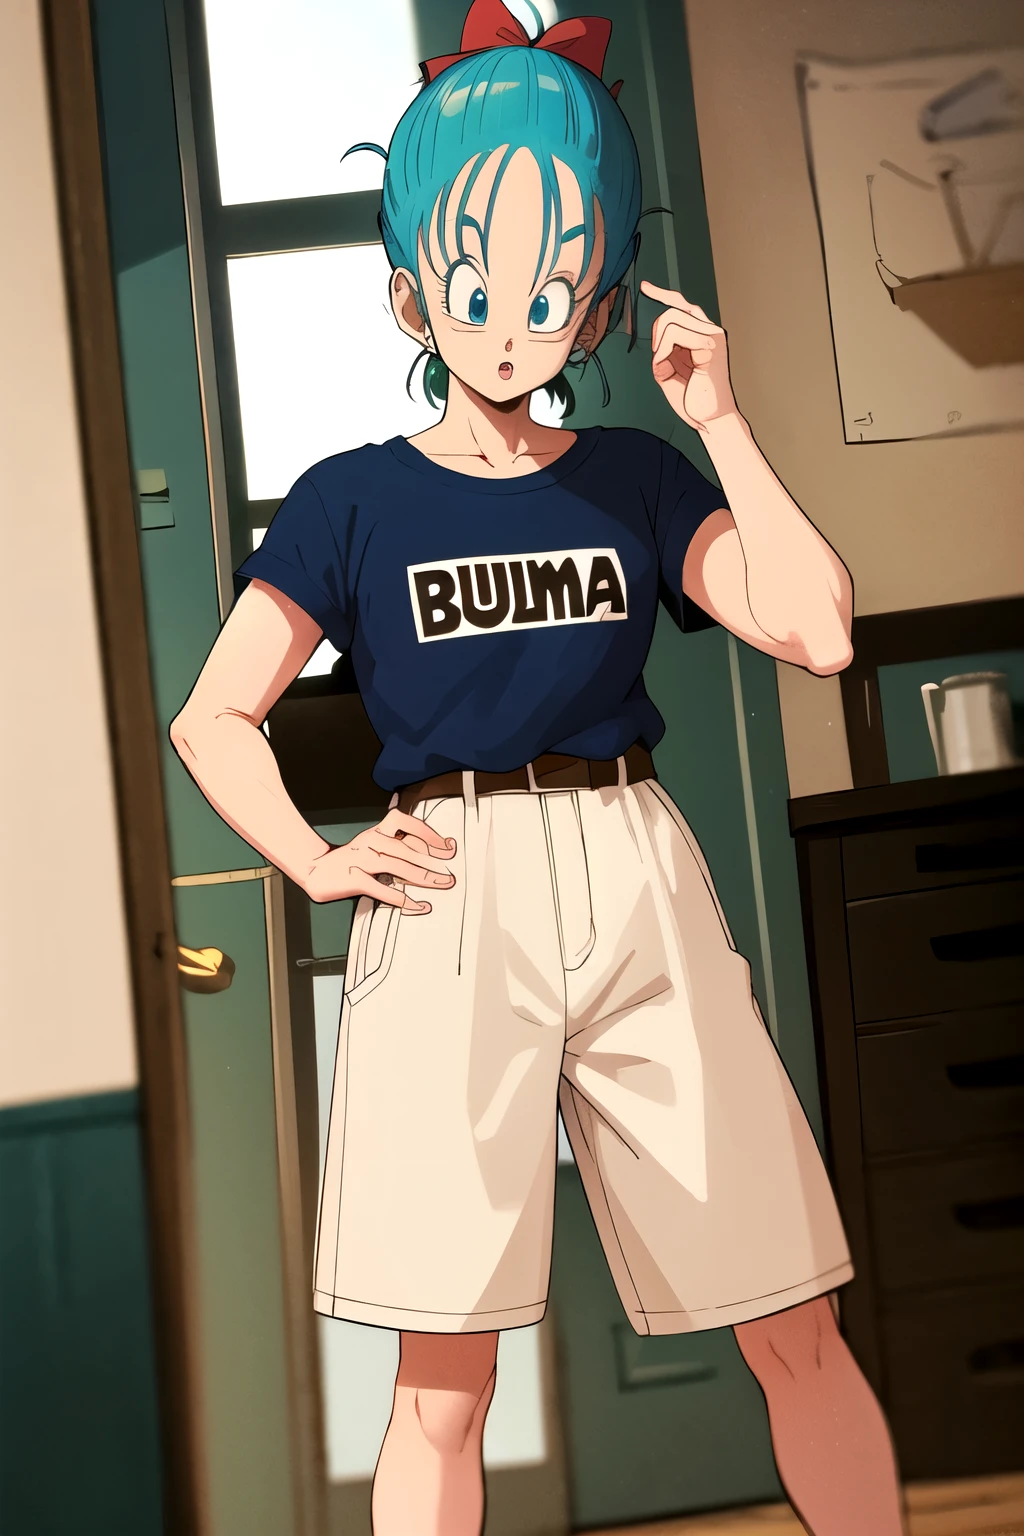 Bulma with the clothes of Goku